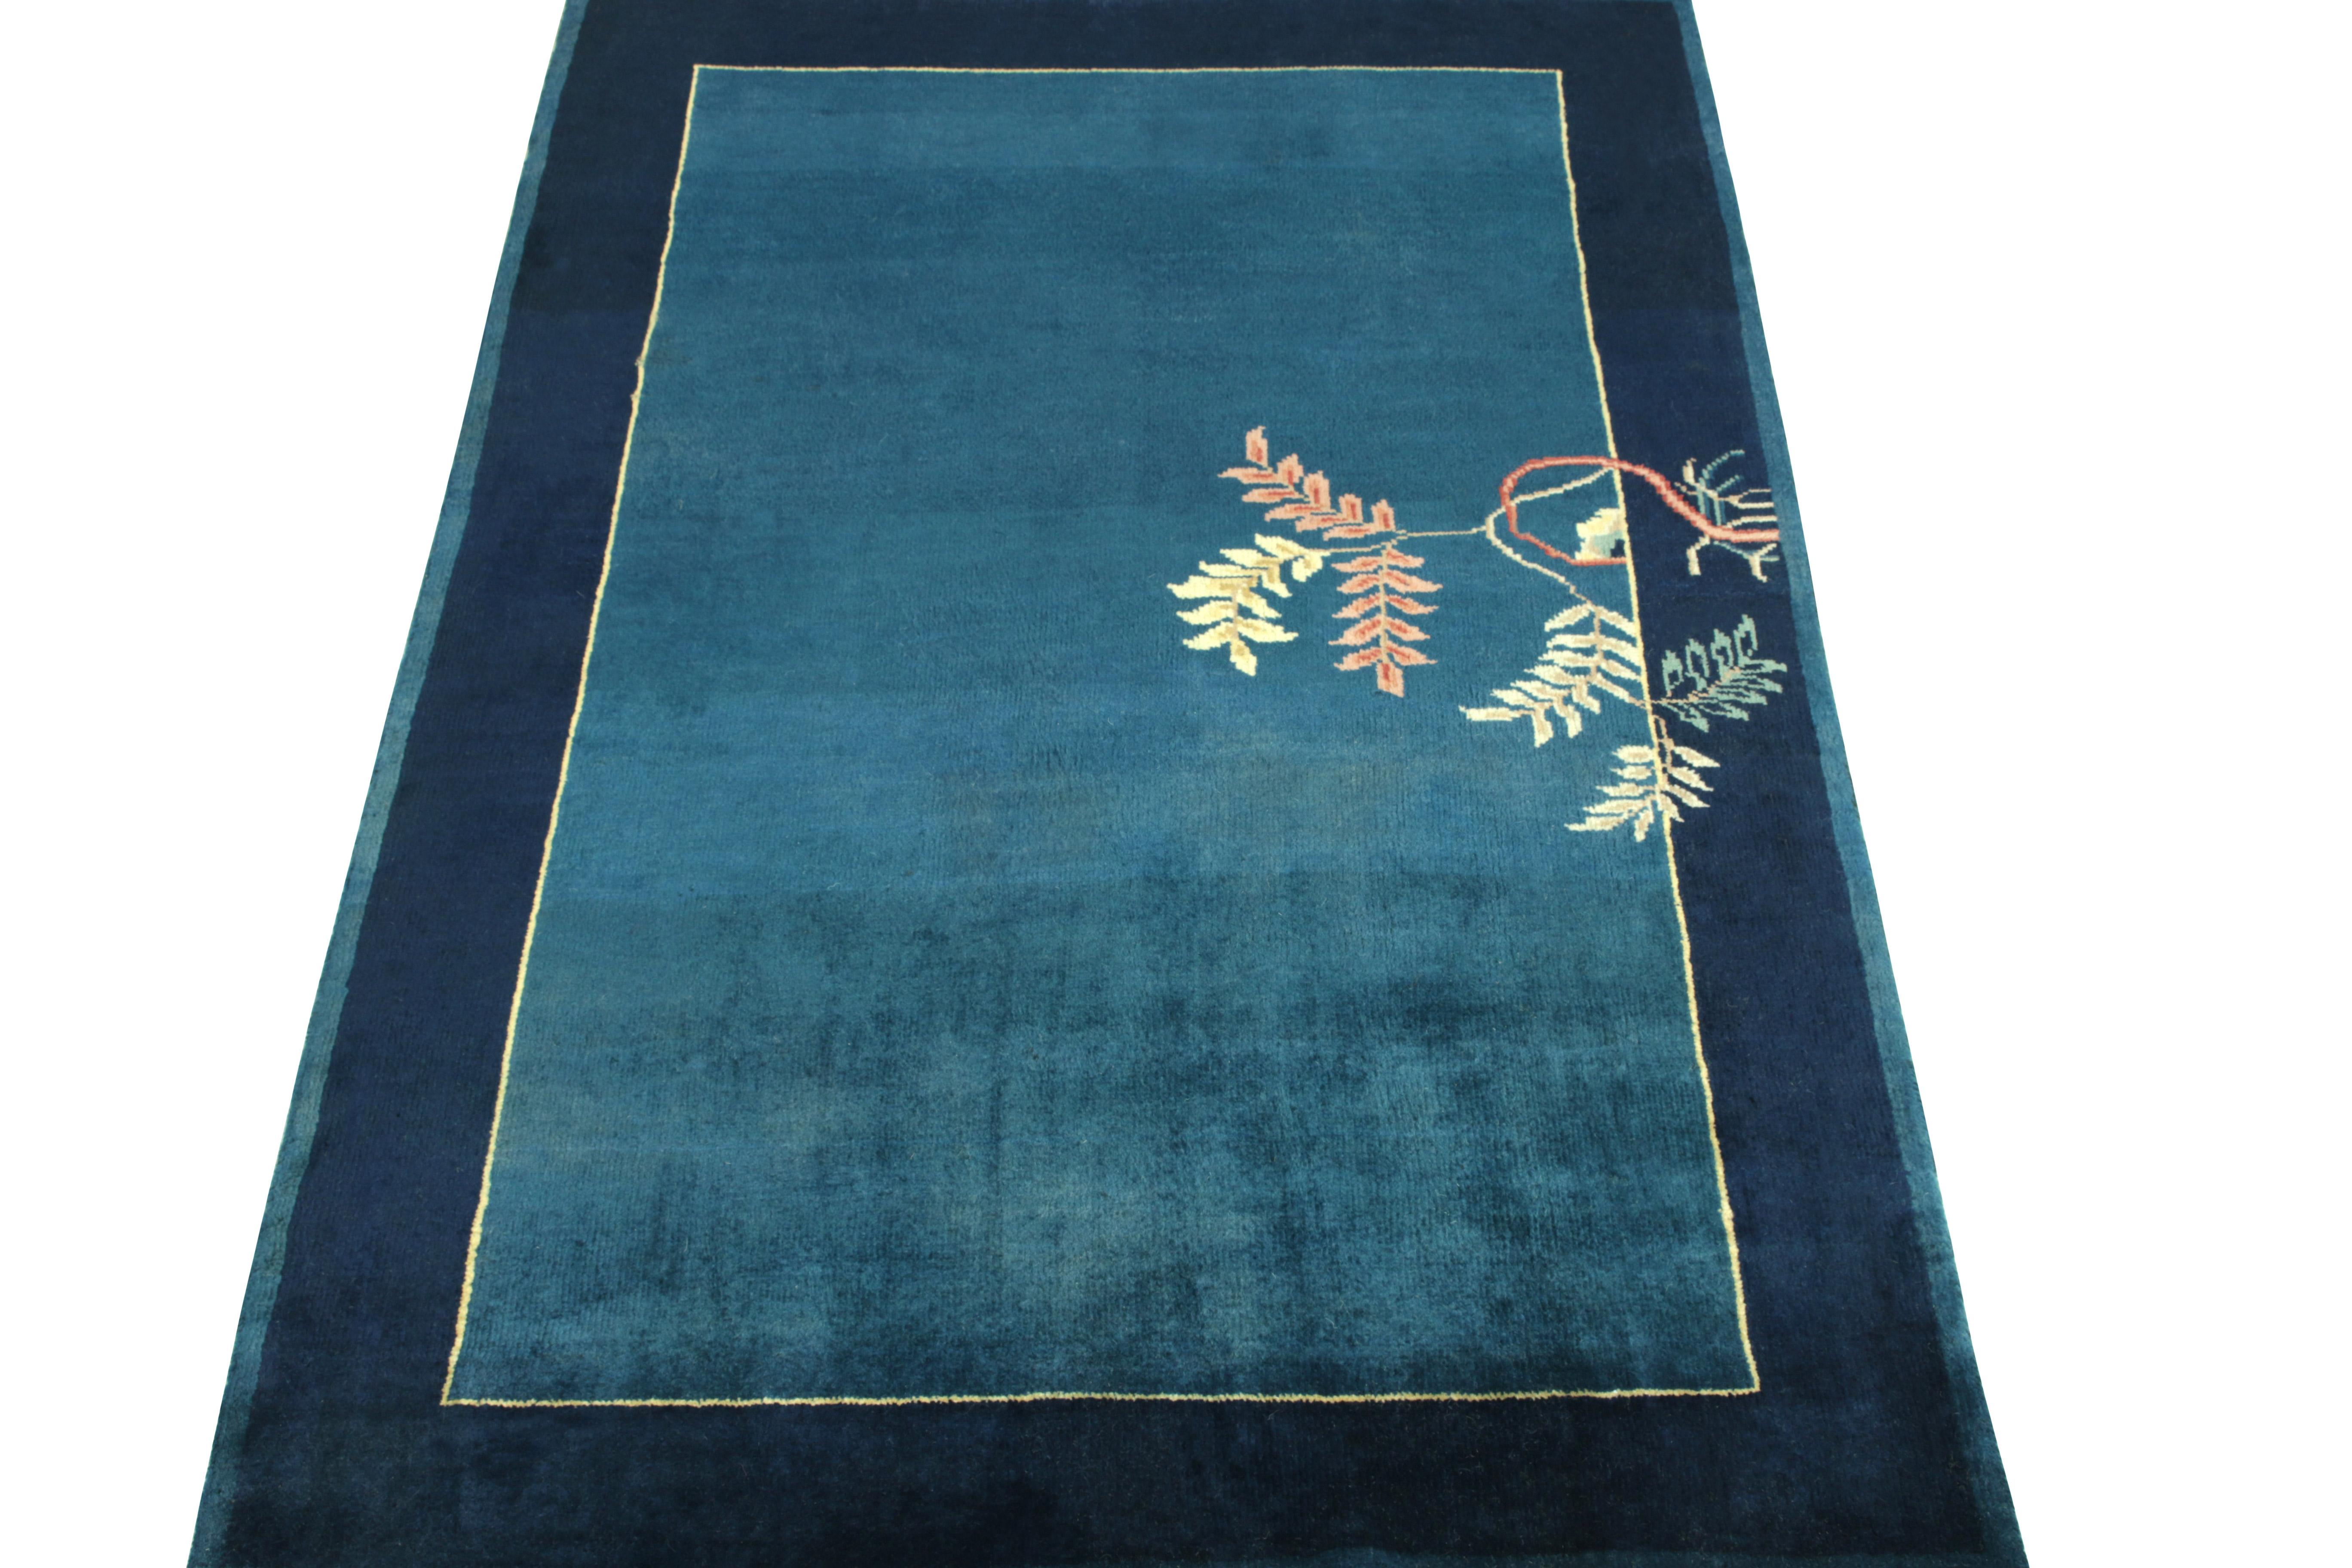 Favouring a swaying floral pattern in off white, peach, yellow & teal from the border to the field, a Chinese deco style vintage rug observing light and dark spots in tones of deep blue—connoting a very classic inspiration of the 1920s with fine